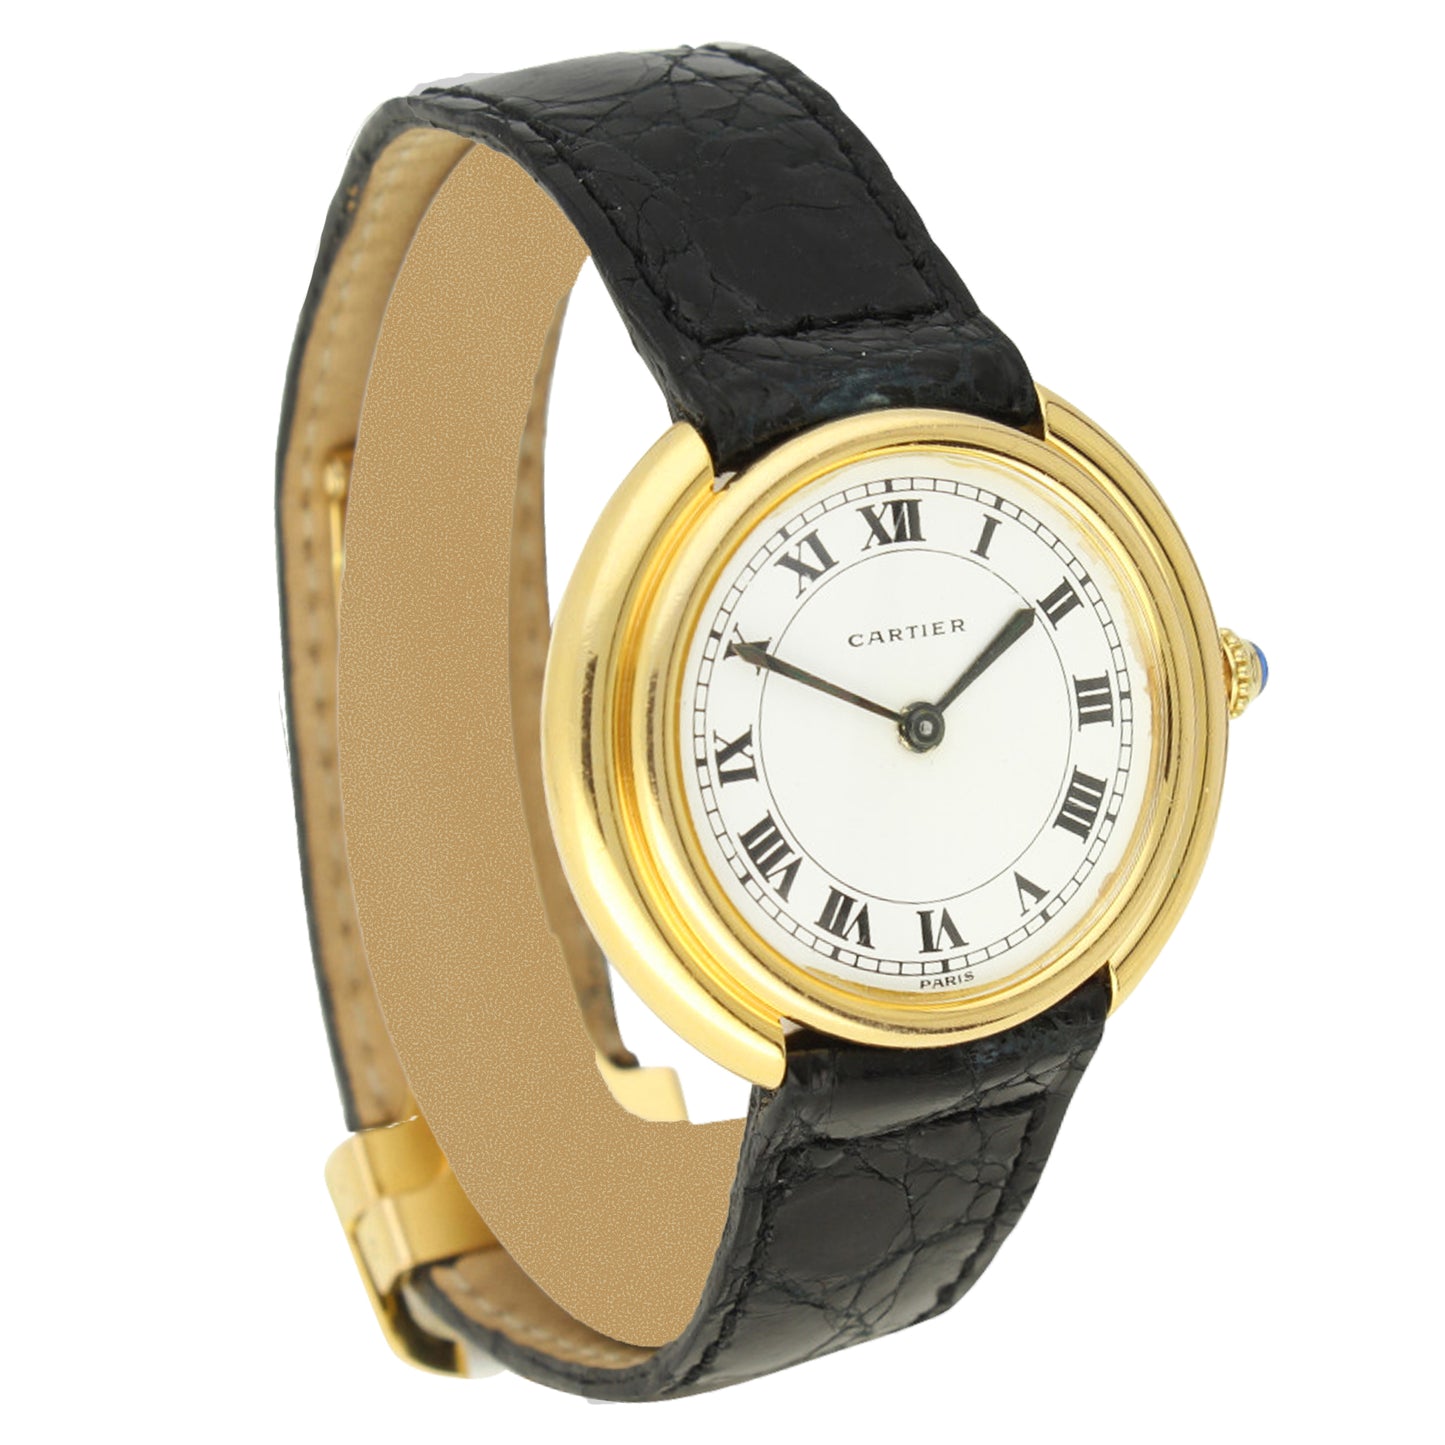 18ct yellow gold Vendôme automatic wristwatch. Made 1970's